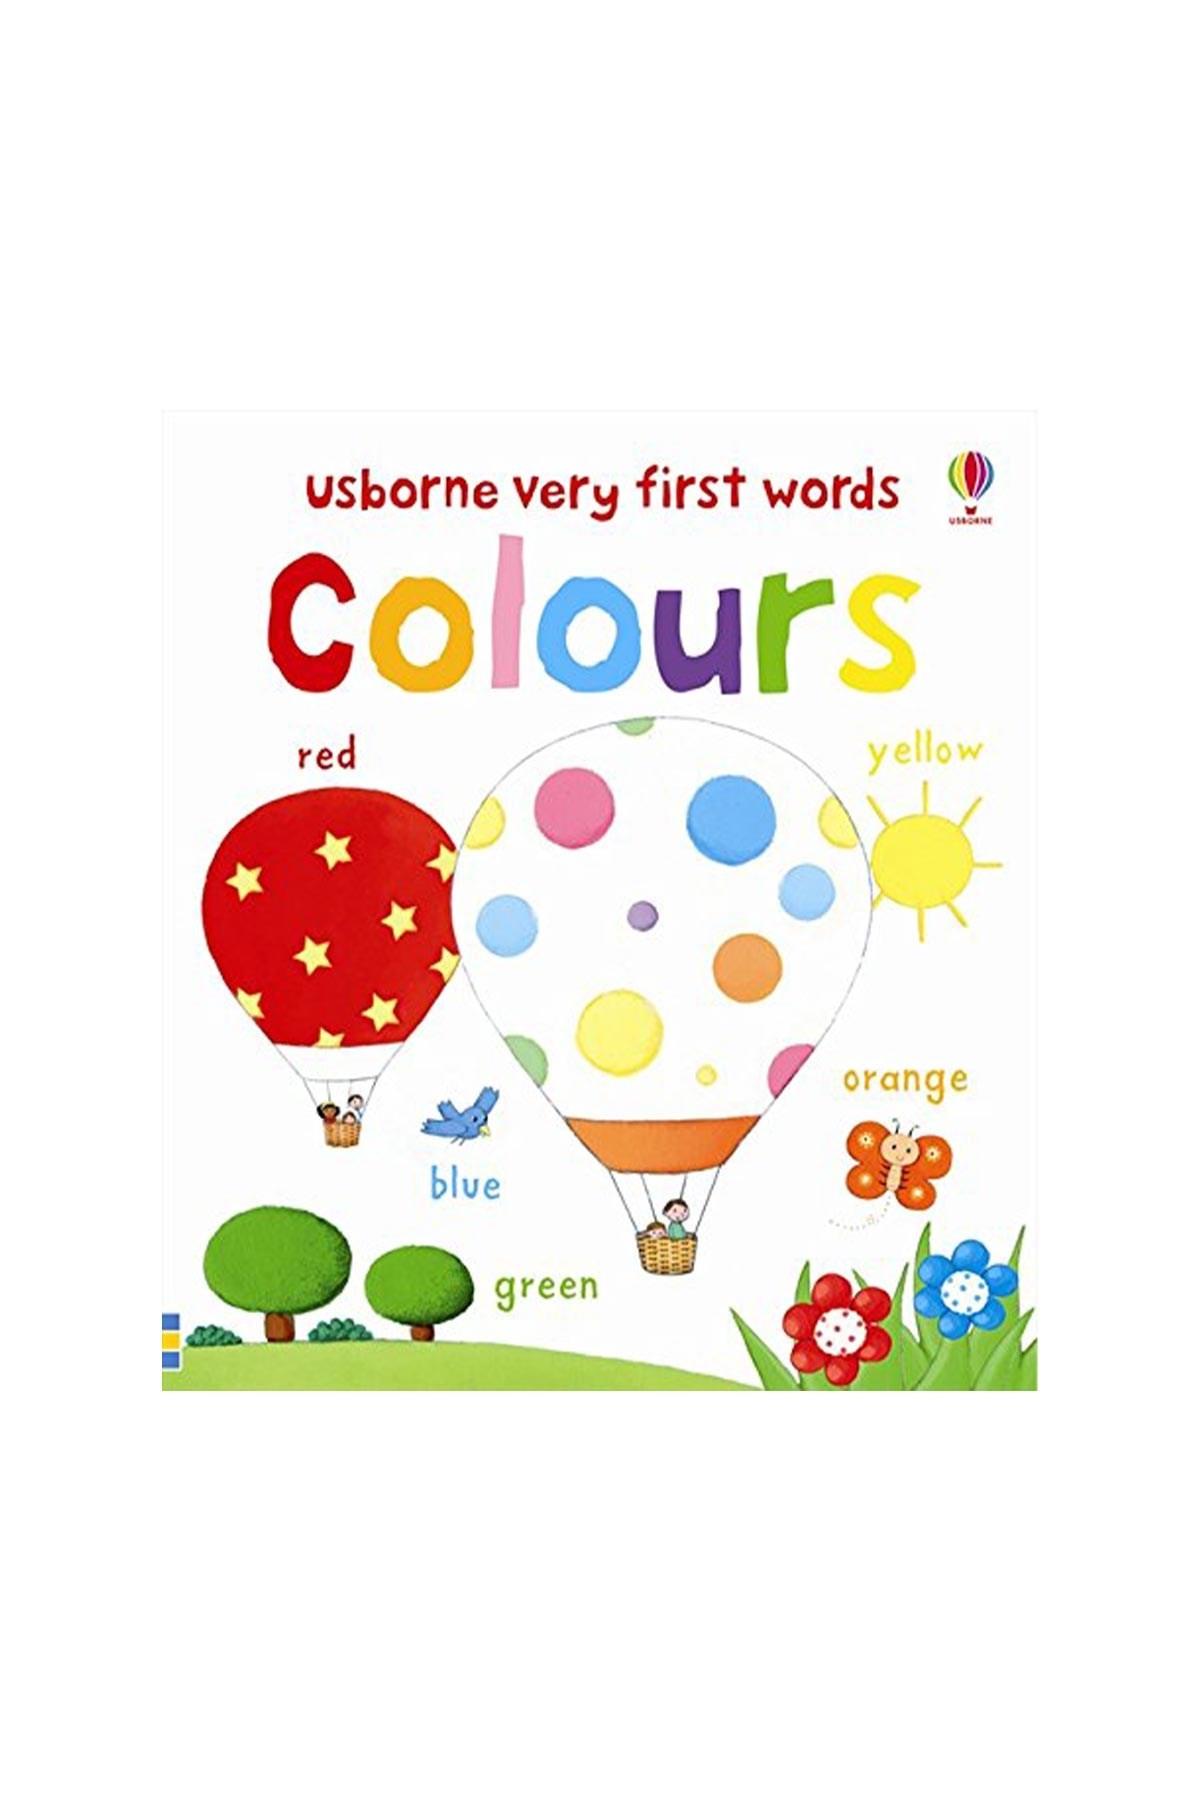 The Usborne Very First Words Colours